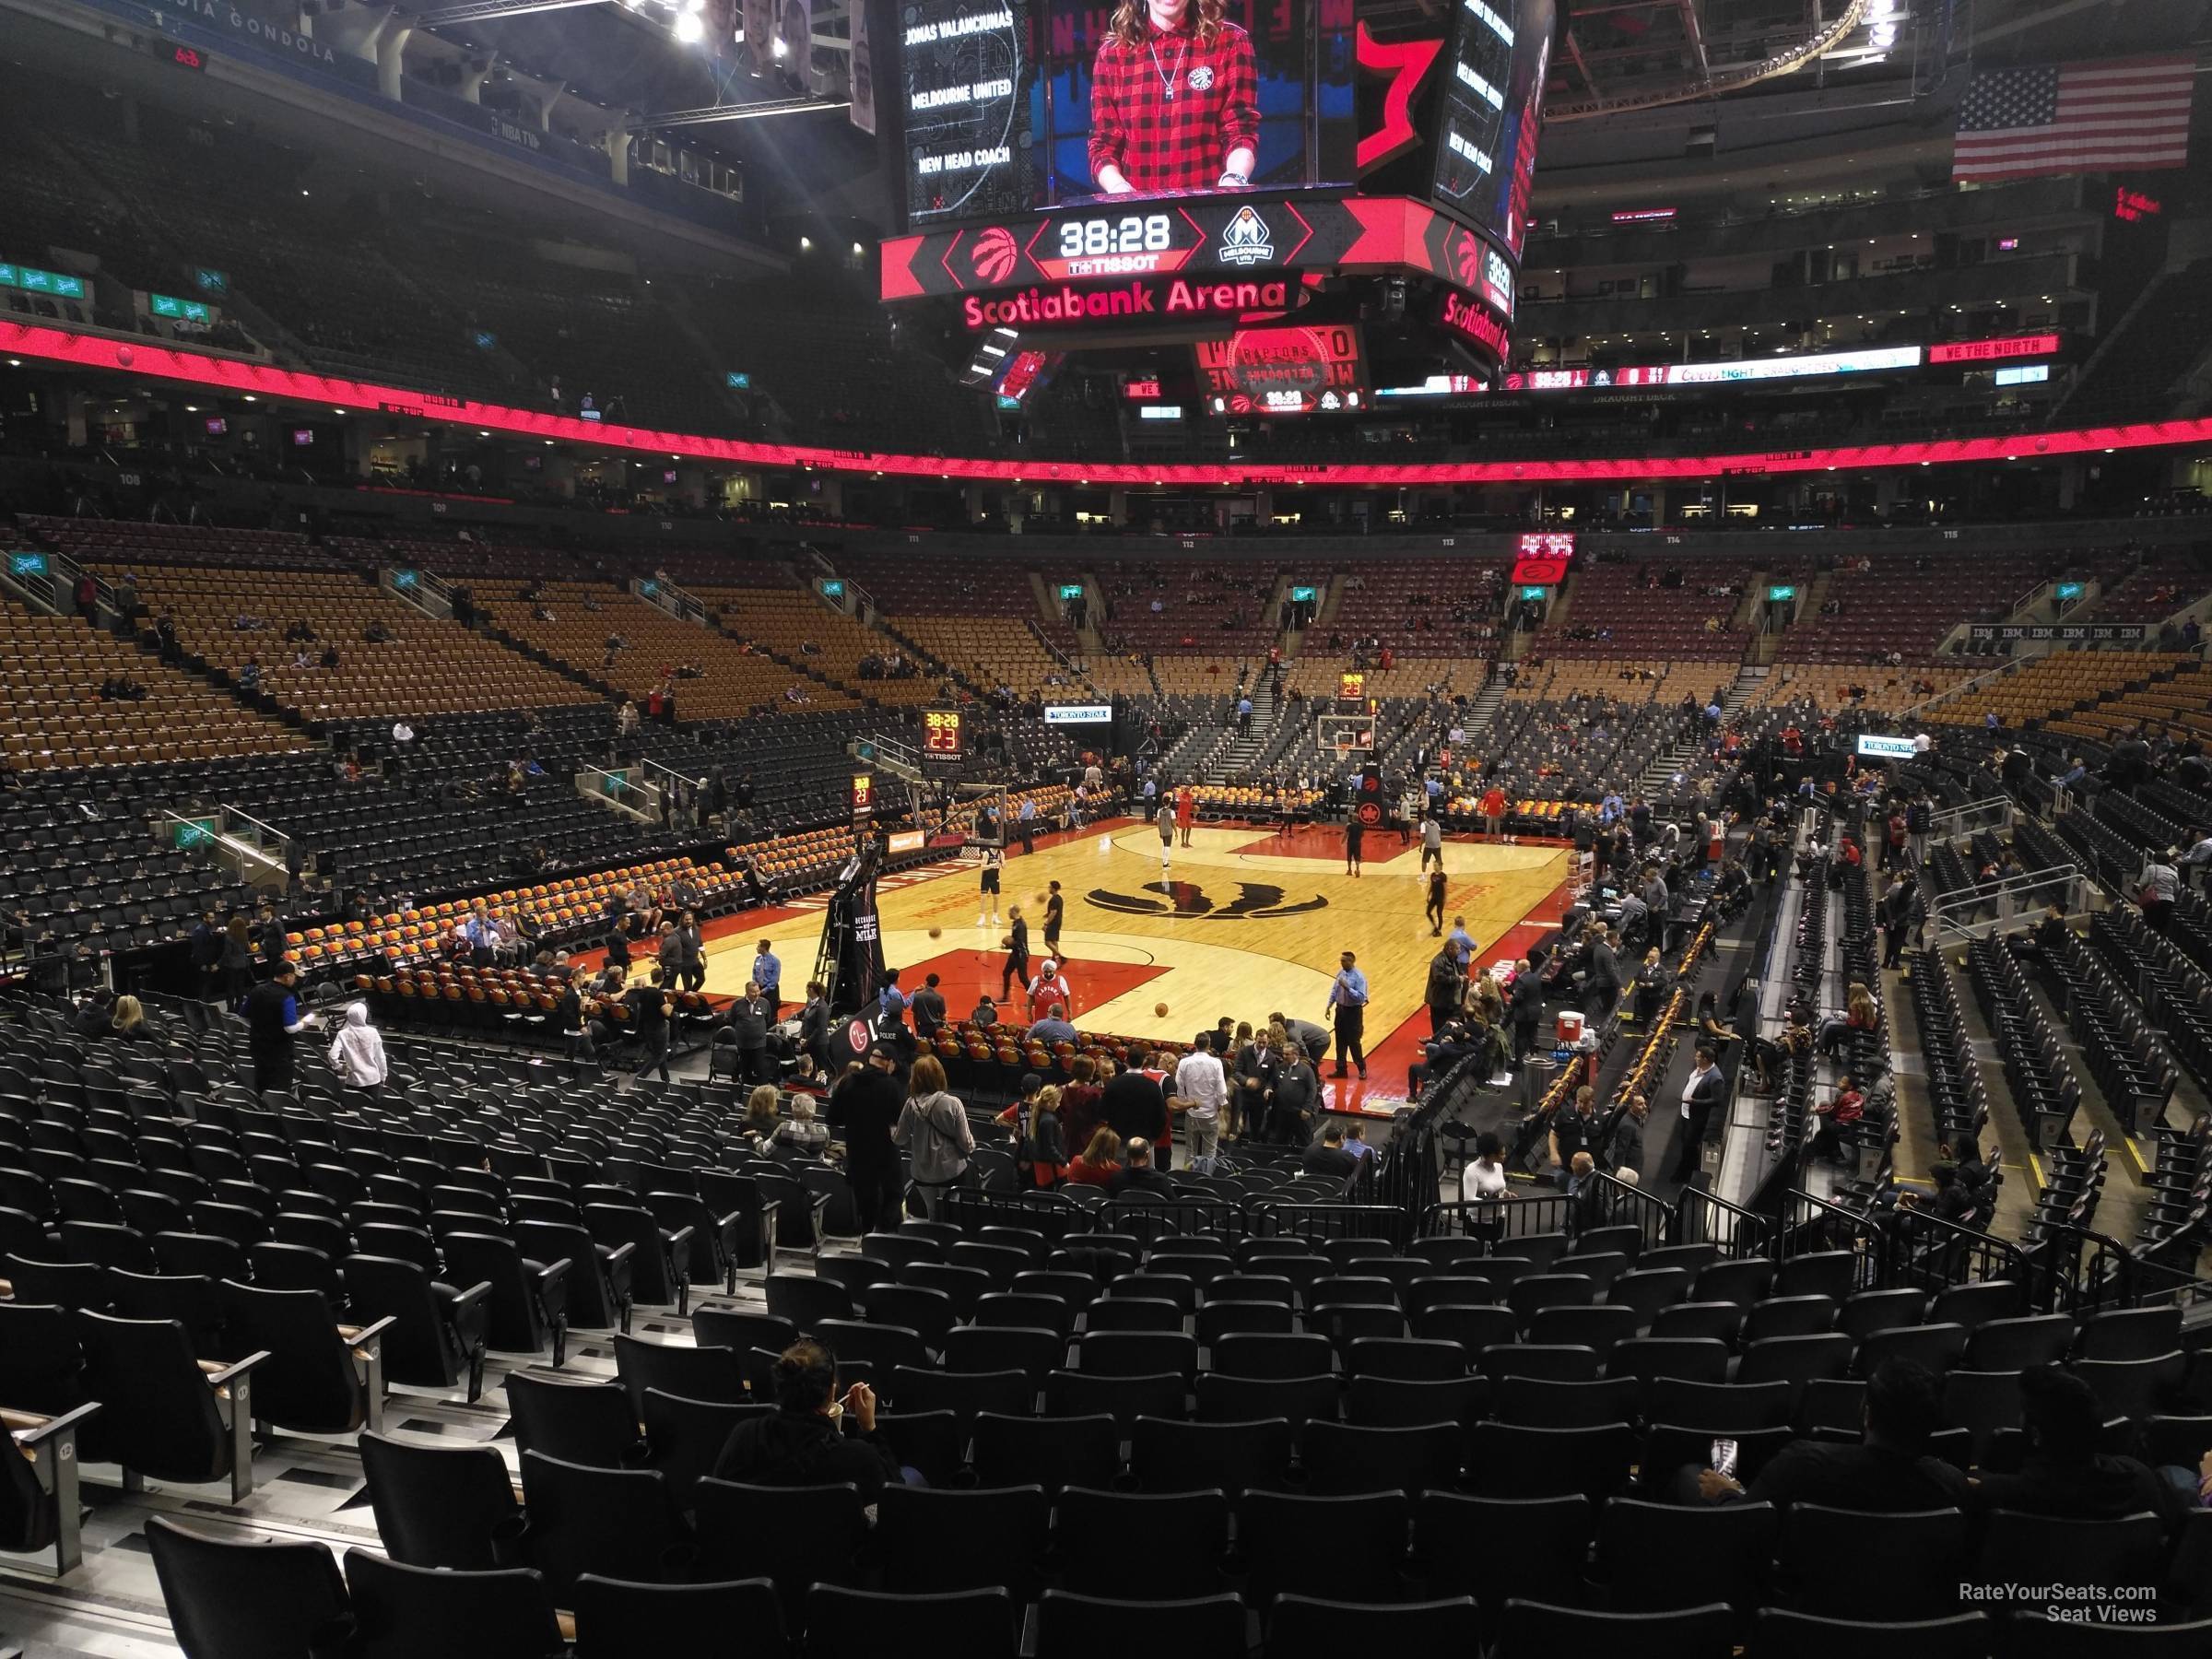 section 101, row 28 seat view  for basketball - scotiabank arena